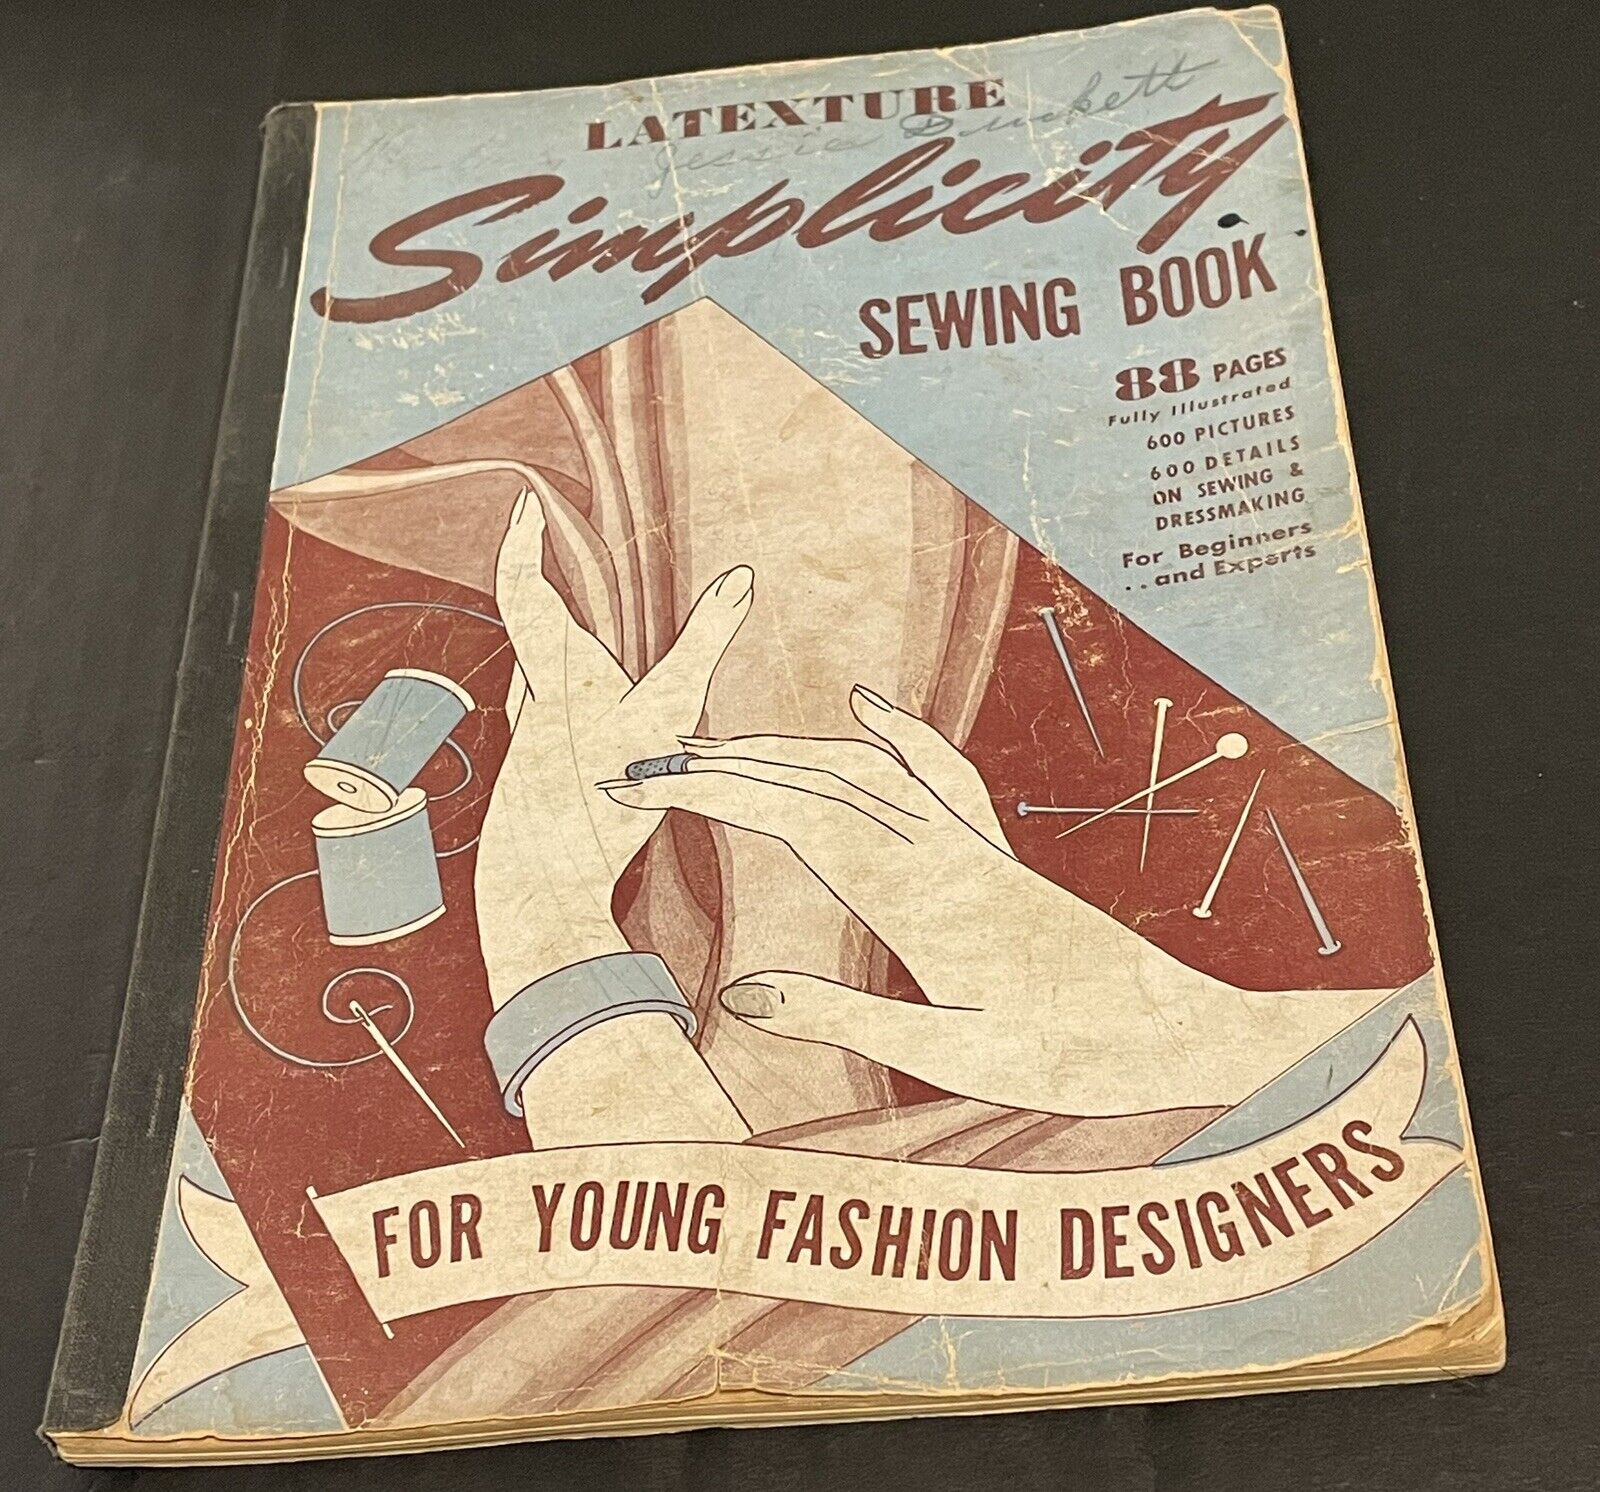 Vintage Latexture Simplicity Sewing Book Mannequin Illustrated Companion Guide